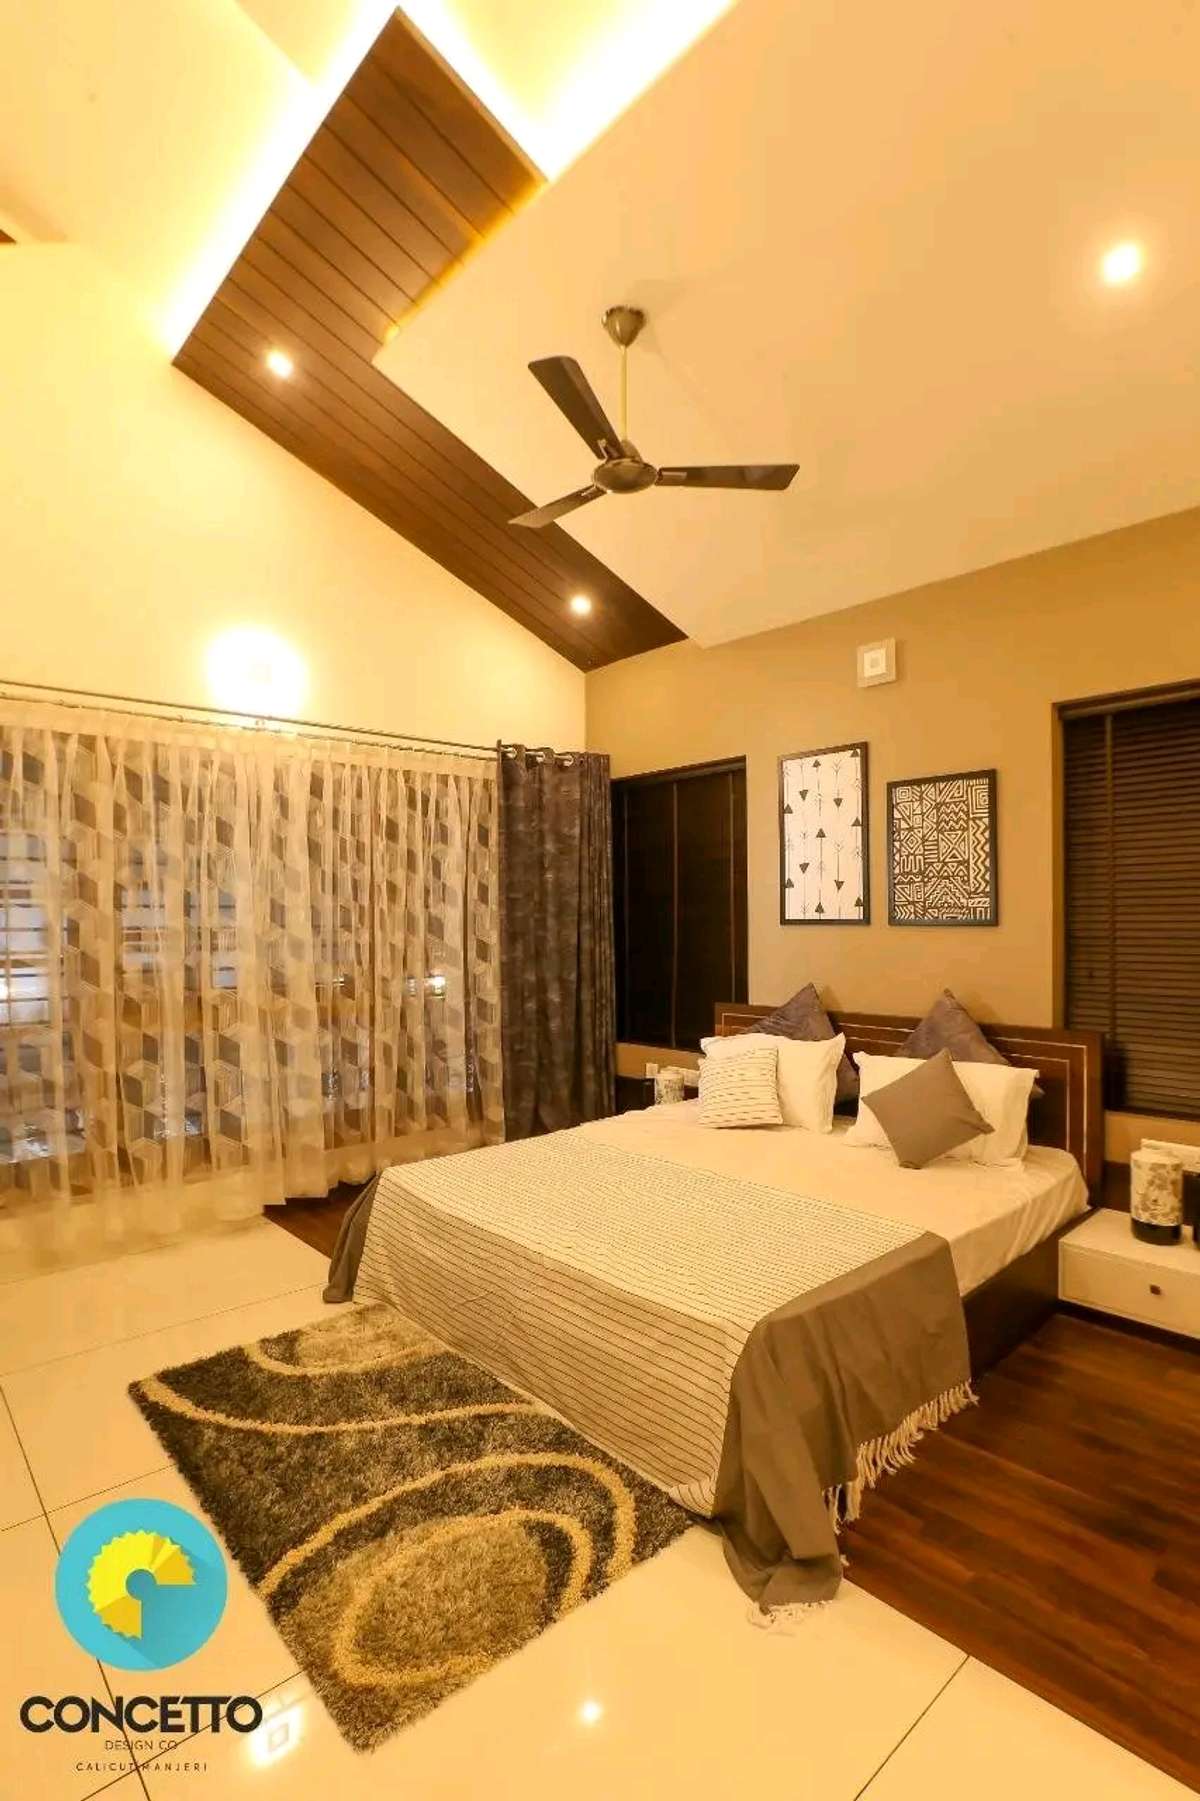 Ceiling, Furniture, Lighting, Storage, Bedroom Designs by Architect Concetto Design Co, Kozhikode | Kolo